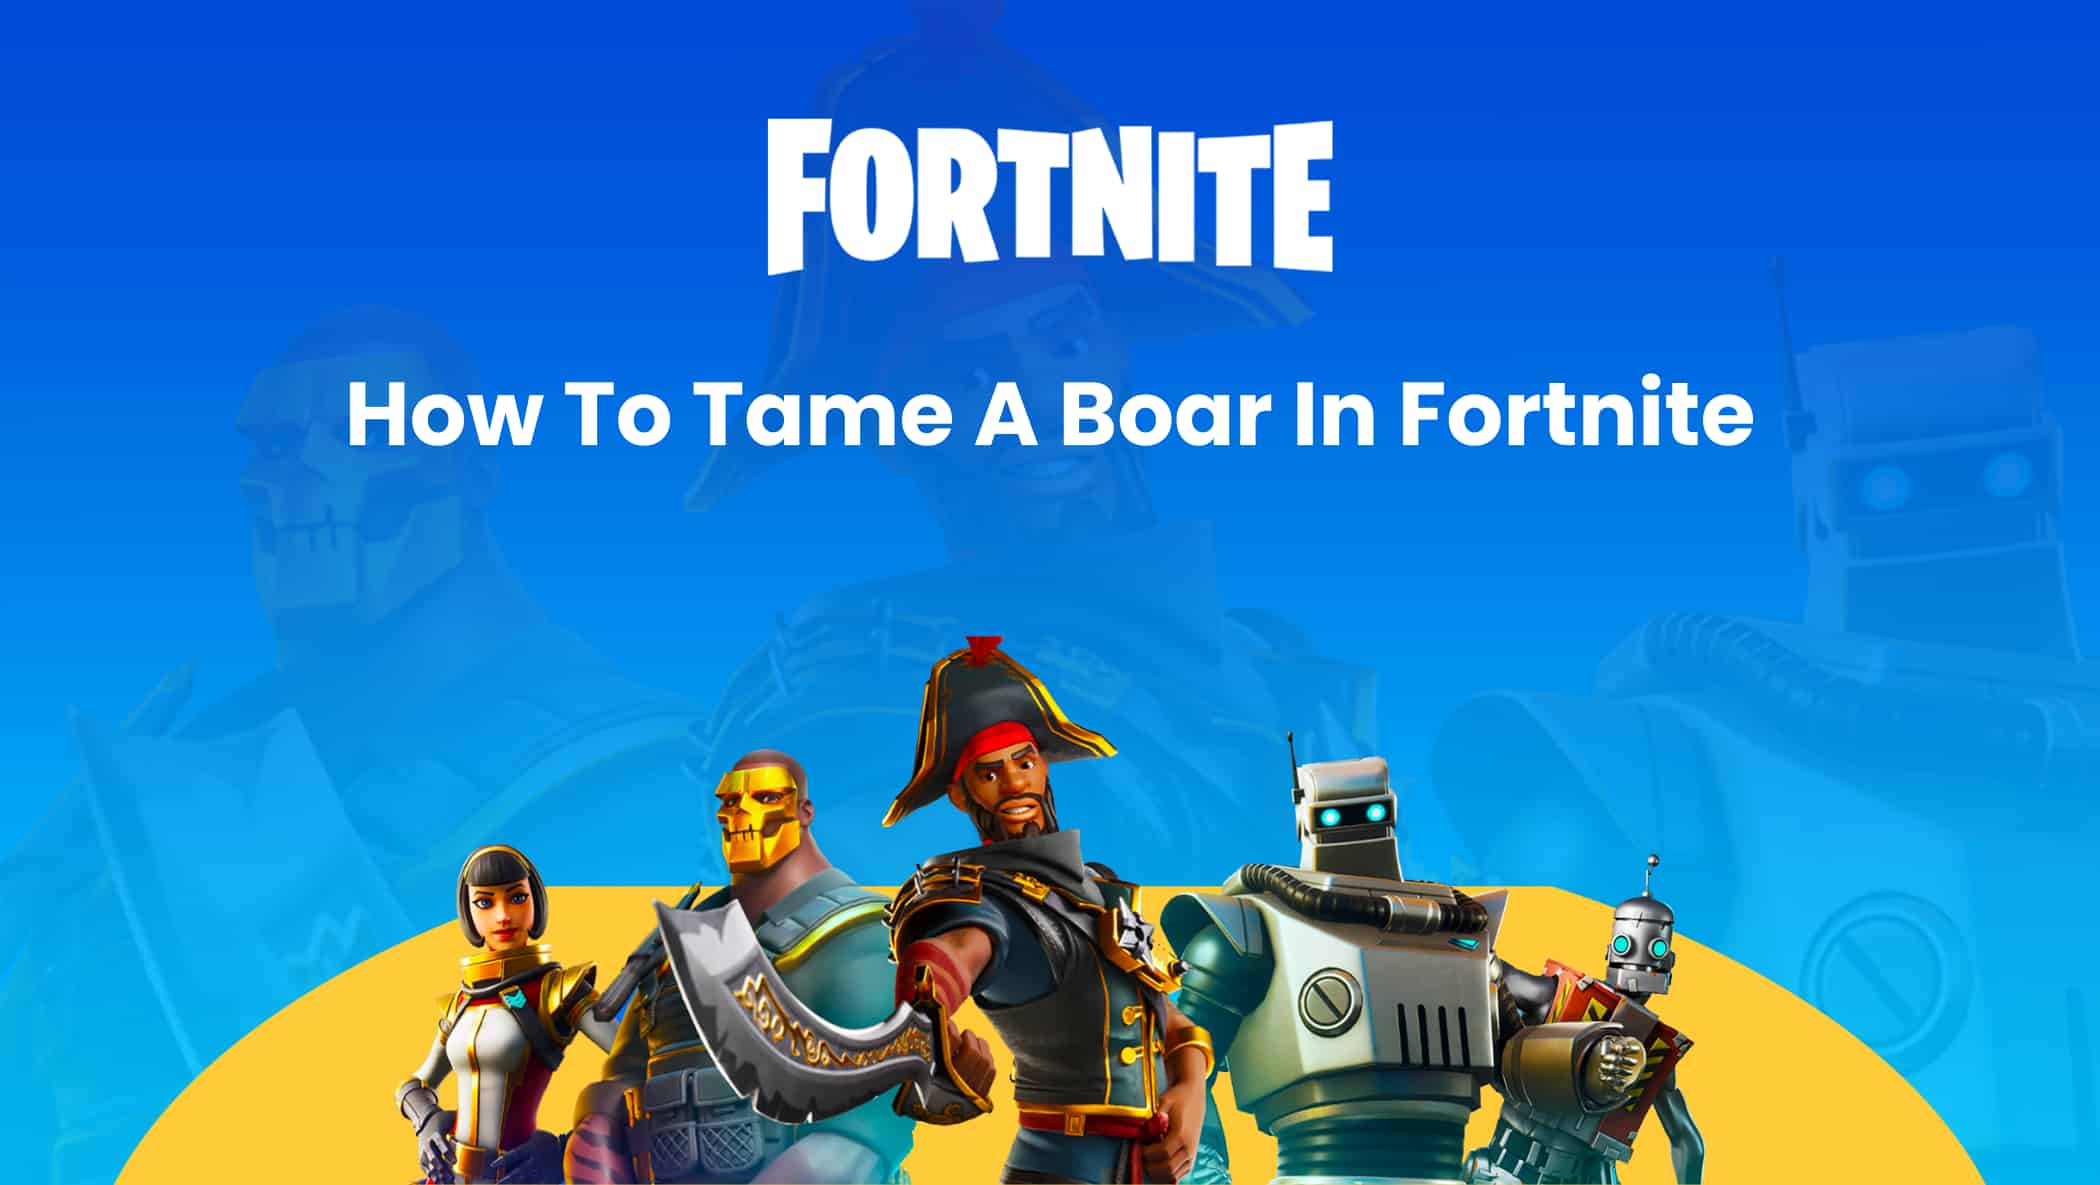 How To Tame A Boar In Fortnite Image